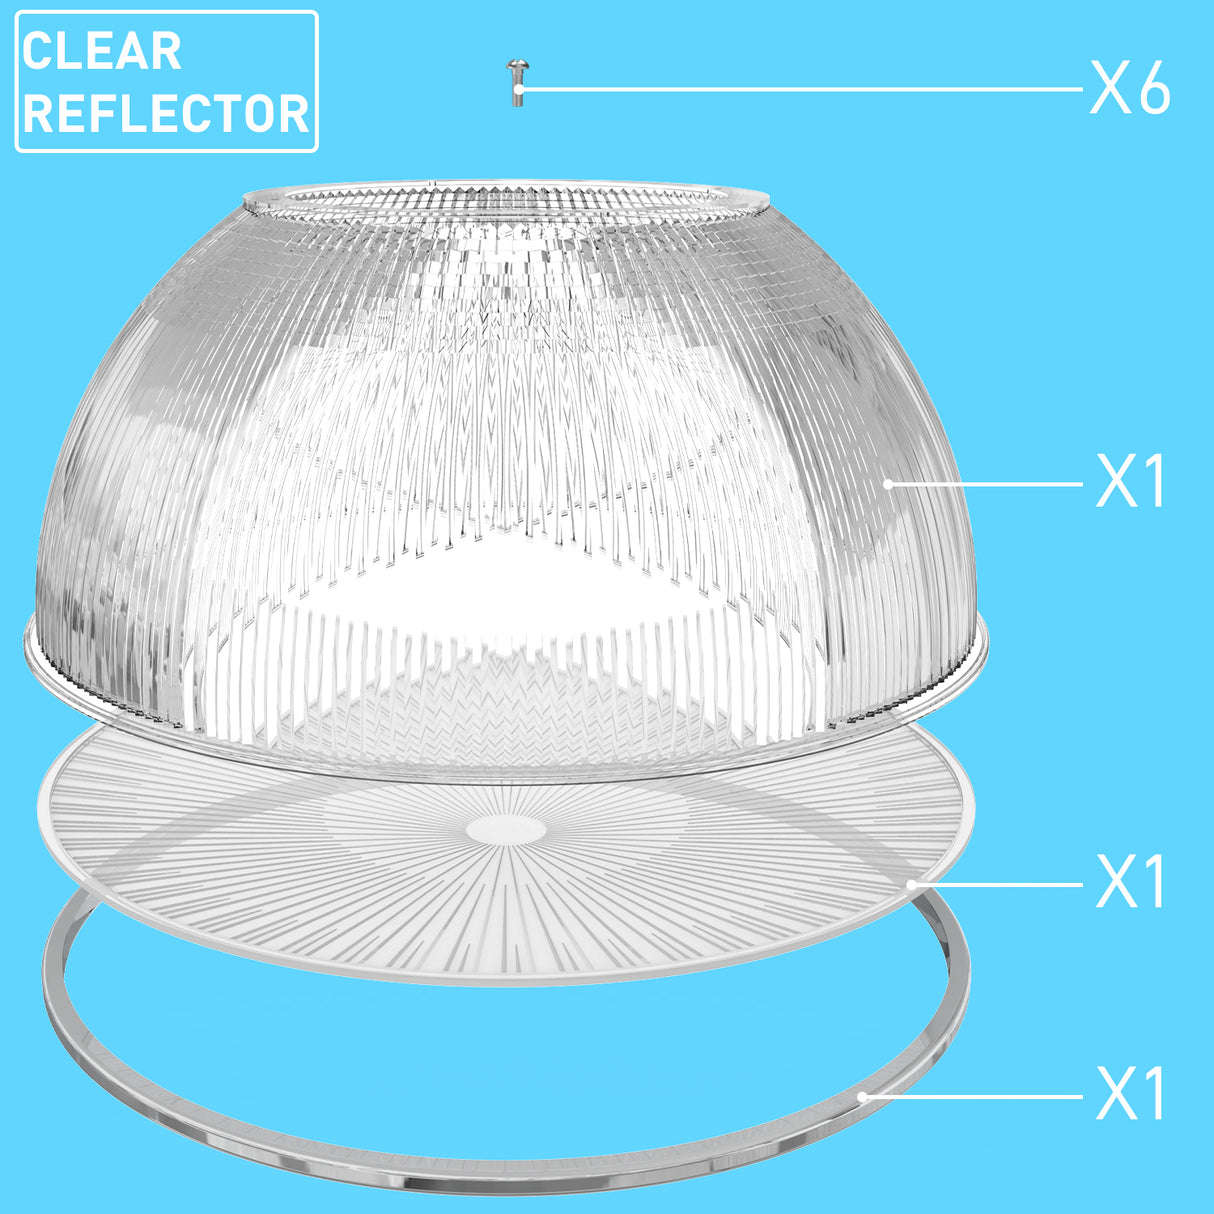 Clear reflector or diffuser can soften the glare of led high bay light.